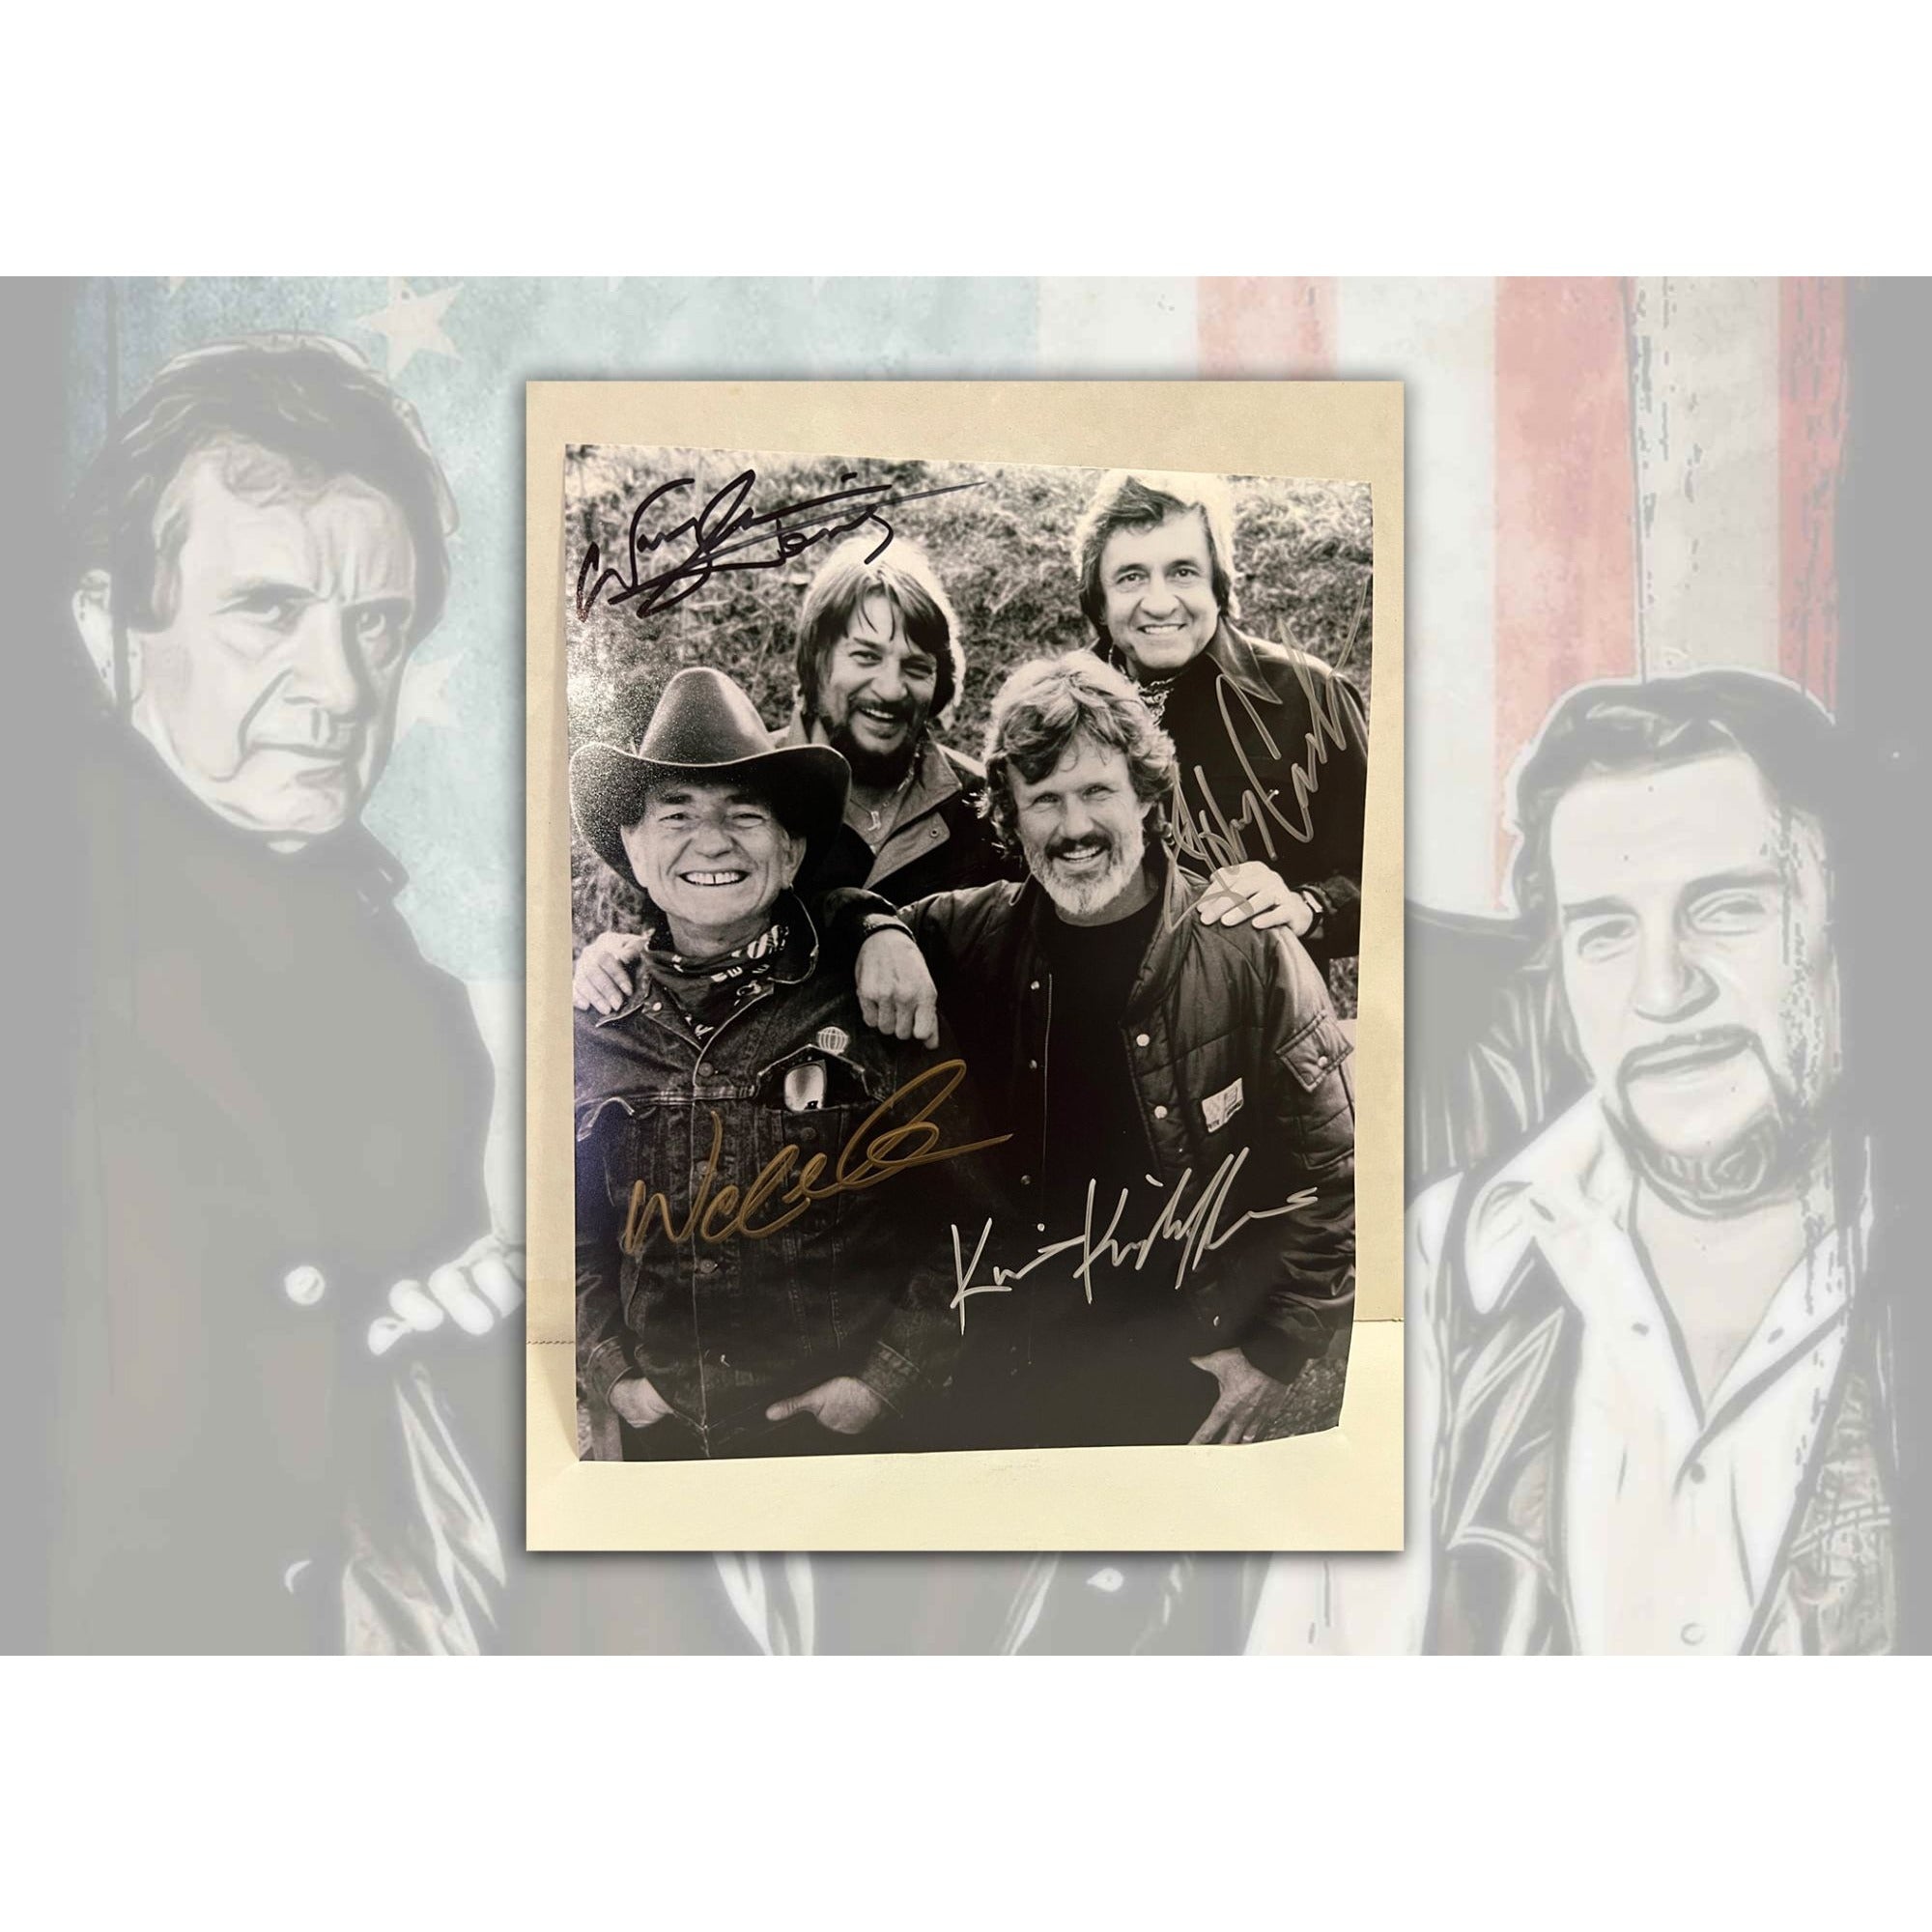 The Highwaymen Johnny Cas h, Waylon Jennings, Willie Nelson, Kris Kristofferson 8x10 photograph signed with proof